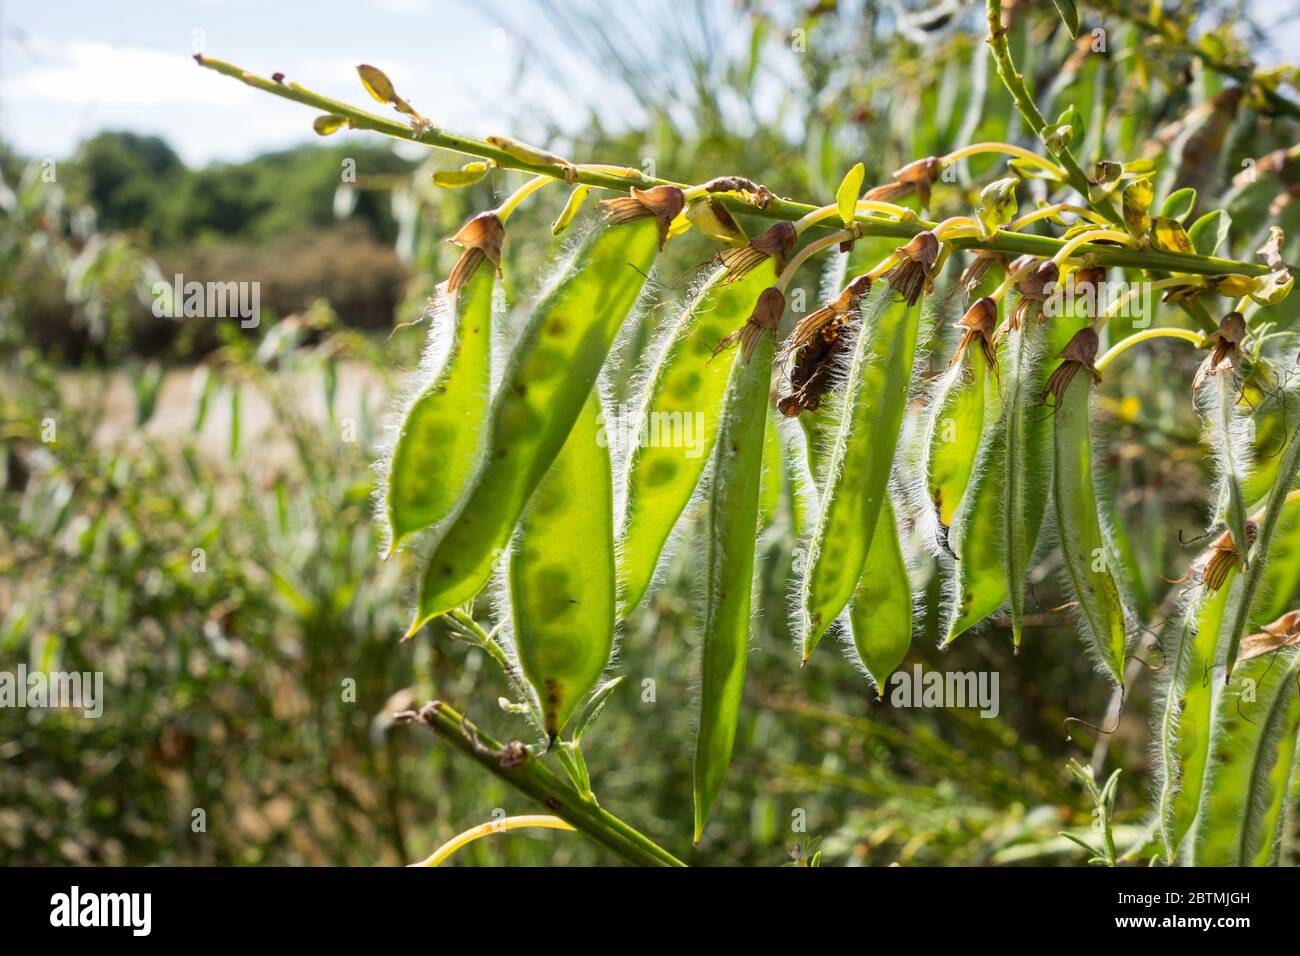 Seed pods or legumes of Cytisus scoparius or Scotch broom Stock Photo